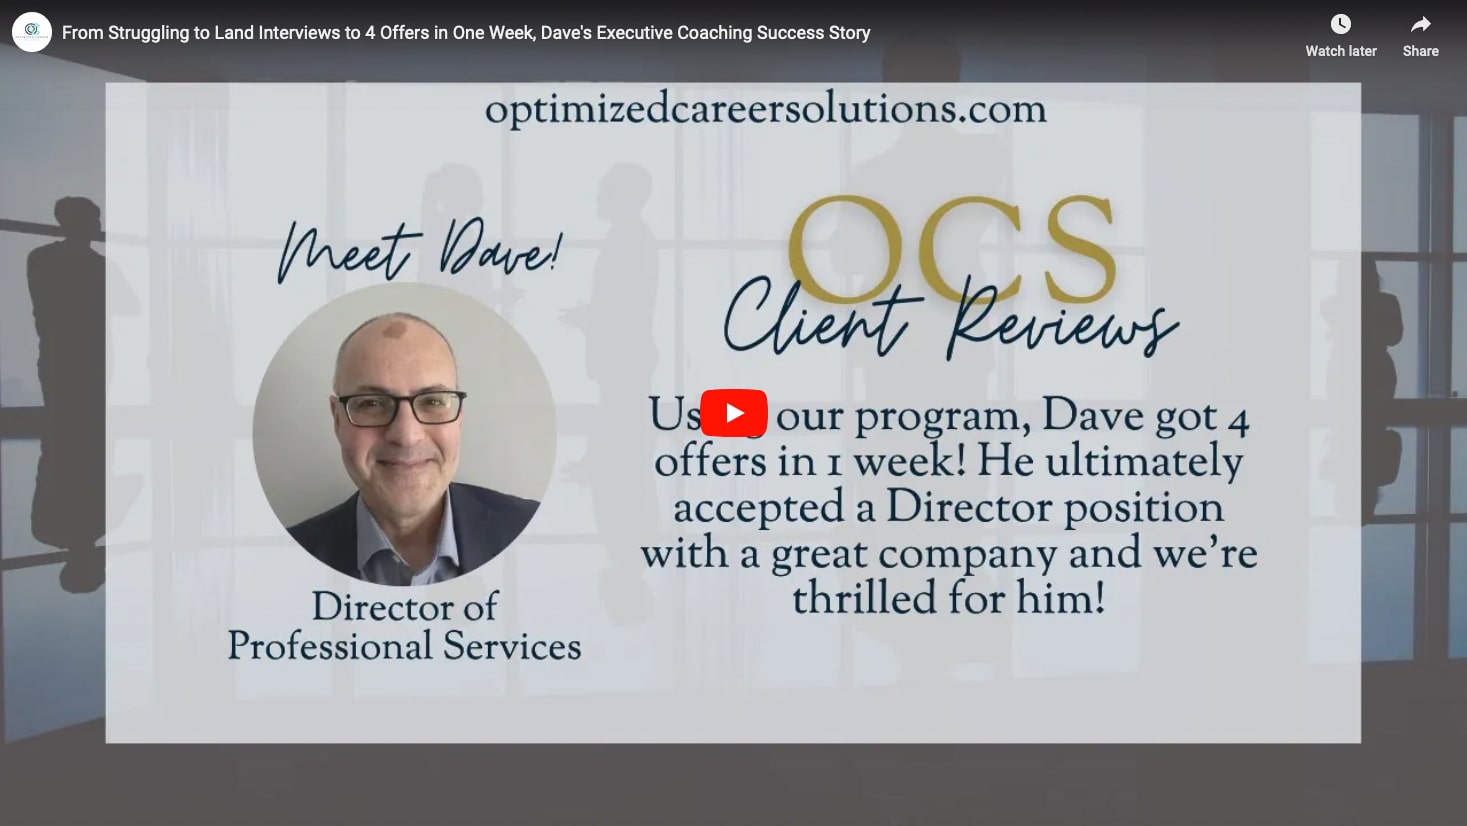 From Struggling to Land Interviews to 4 Offers in One Week, Dave's Executive Coaching Success Story